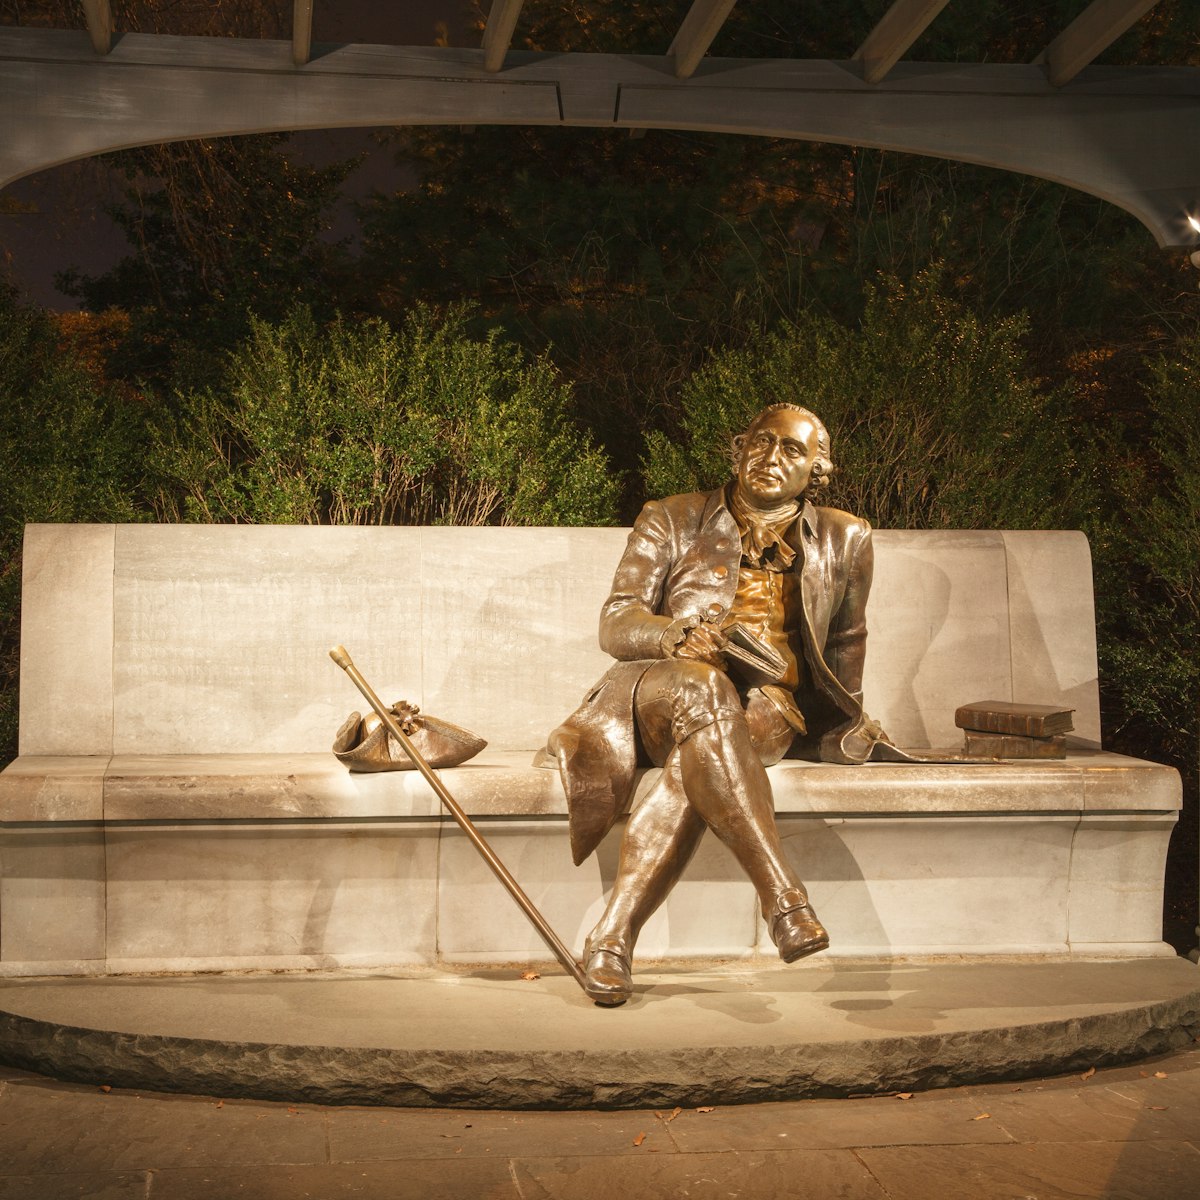 WASHINGTON, DC - DECEMBER 15:  The George Mason Memorial, seen on December 15, 2012 in Washington, DC, commemorates the contributions of an important Founding Father, George Mason.; Shutterstock ID 166296854; Your name (First / Last): Josh Vogel; Project no. or GL code: 56530; Network activity no. or Cost Centre: Online-Design; Product or Project: 65050/7529/Josh Vogel/LP.com Destination Galleries